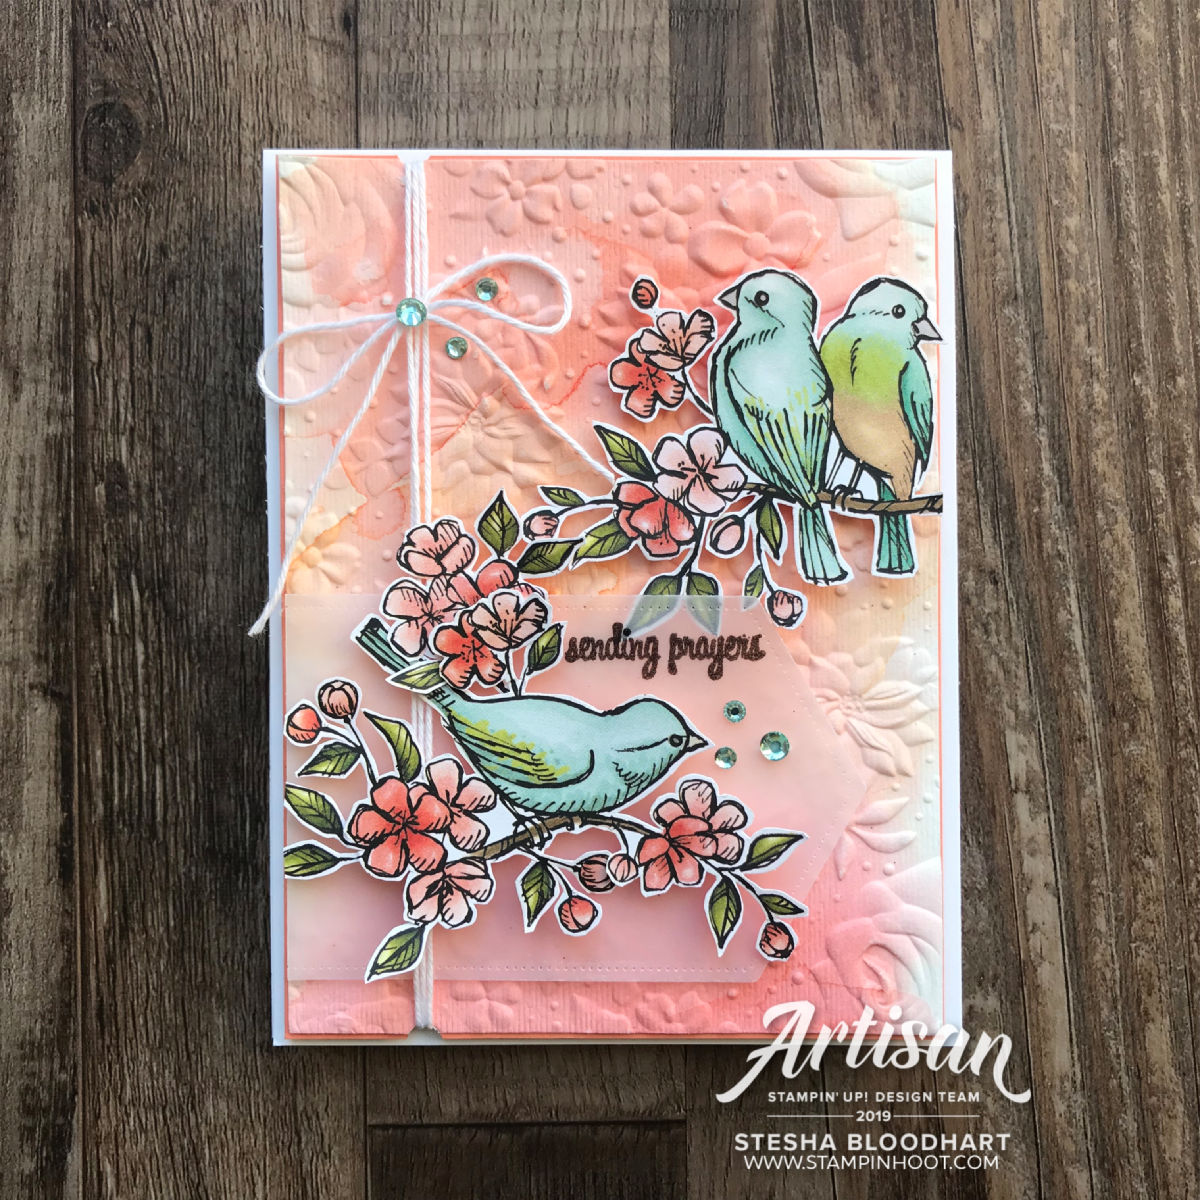 Country Floral 3D Embossing Folder & Bird Ballad Designer Series Paper by Stampin' Up! Card created by 2019 Artisan Stesha Bloodhart, Stampin' Hoot!